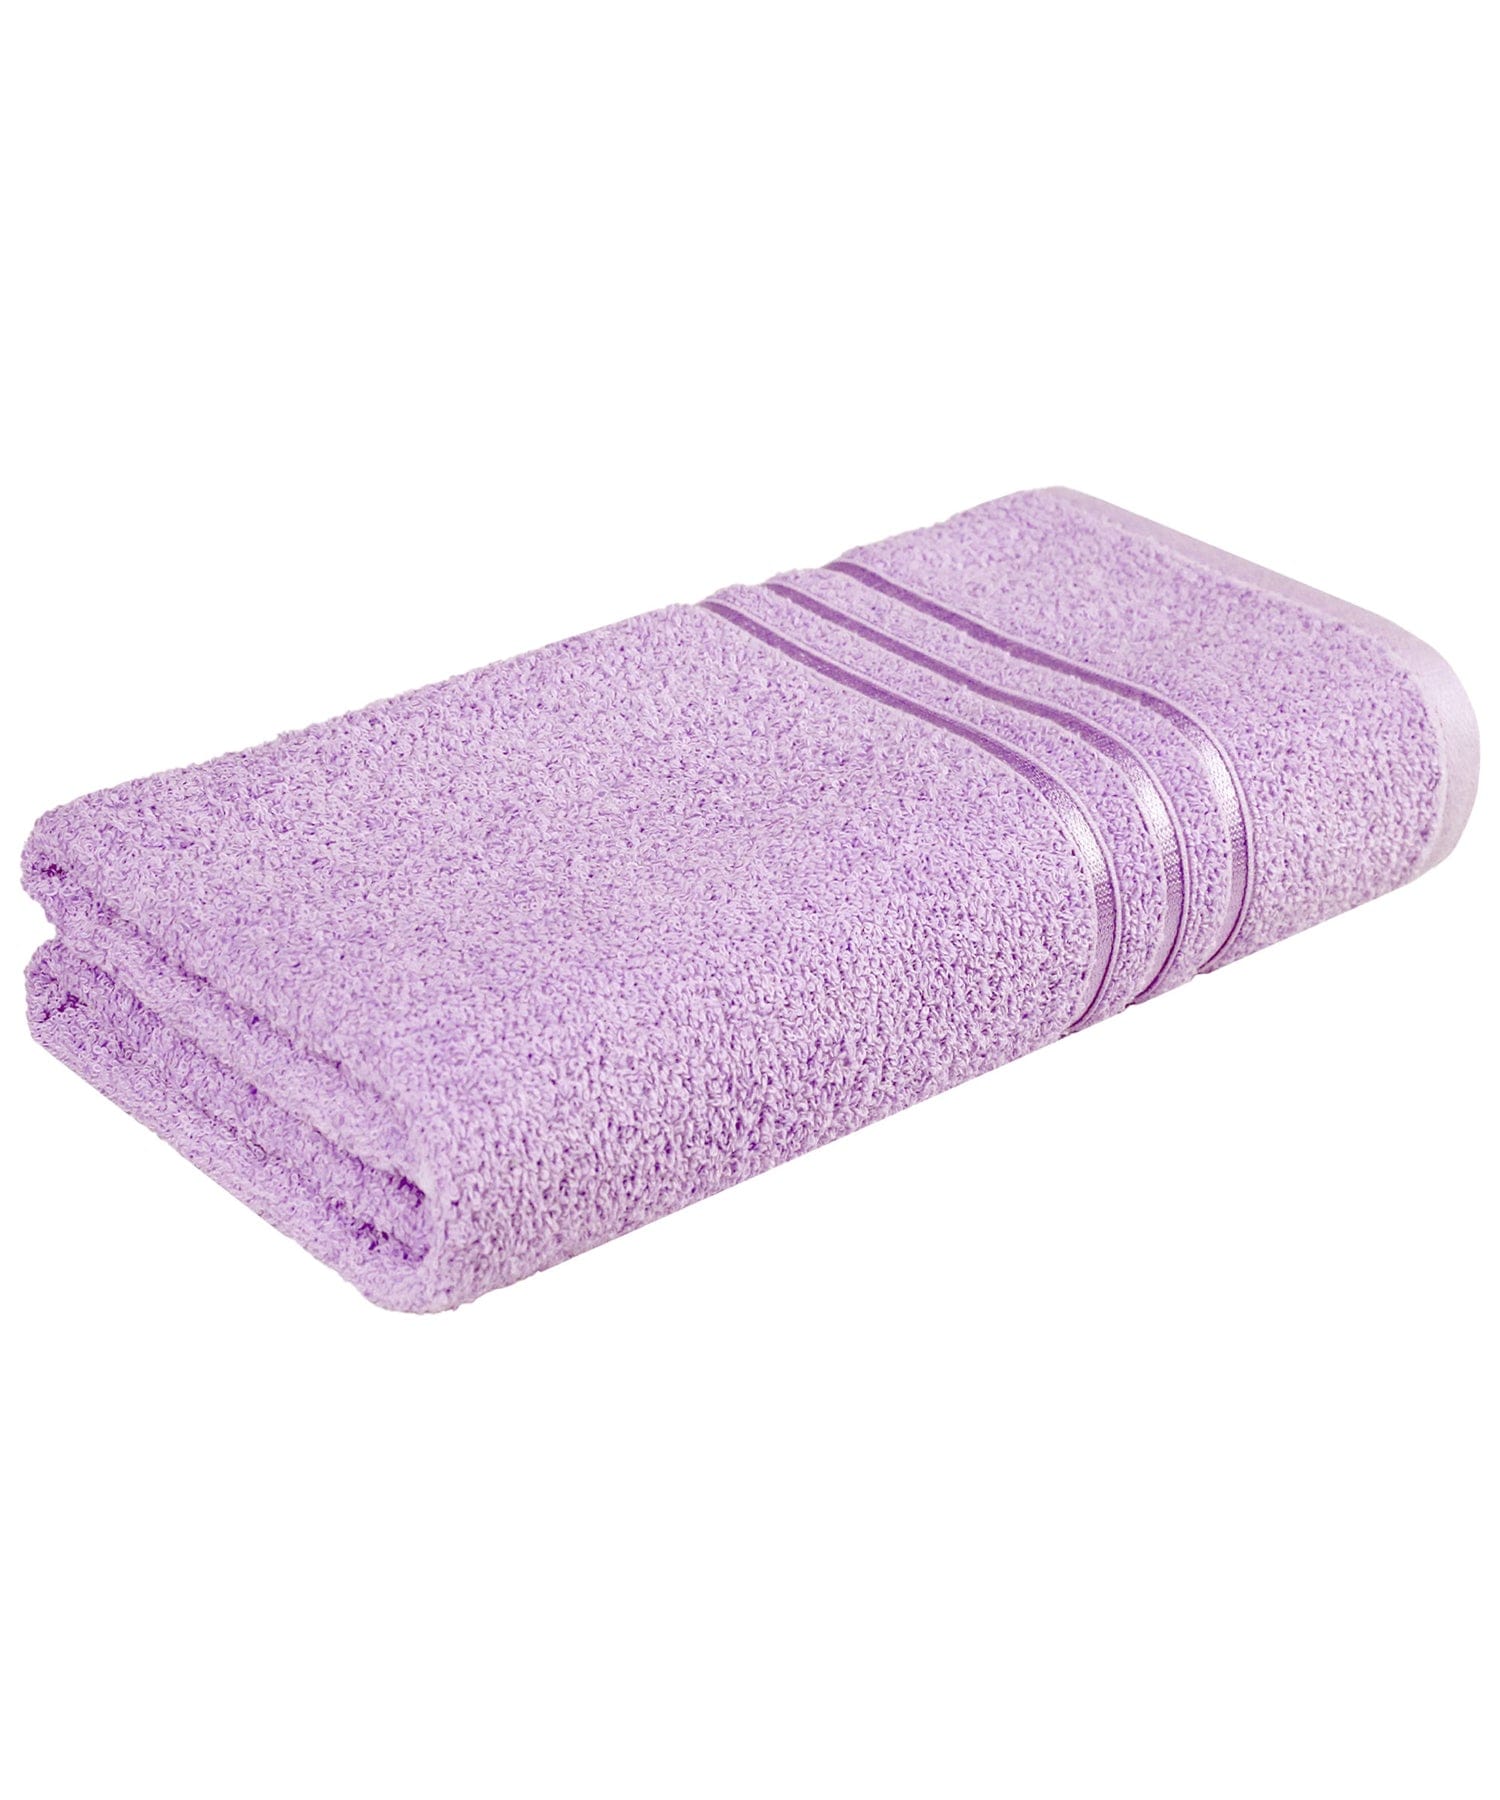 COMFORT LIVING TOWELS,100% Cotton,Quicky Dry,Light Weight, VIOLET SKY